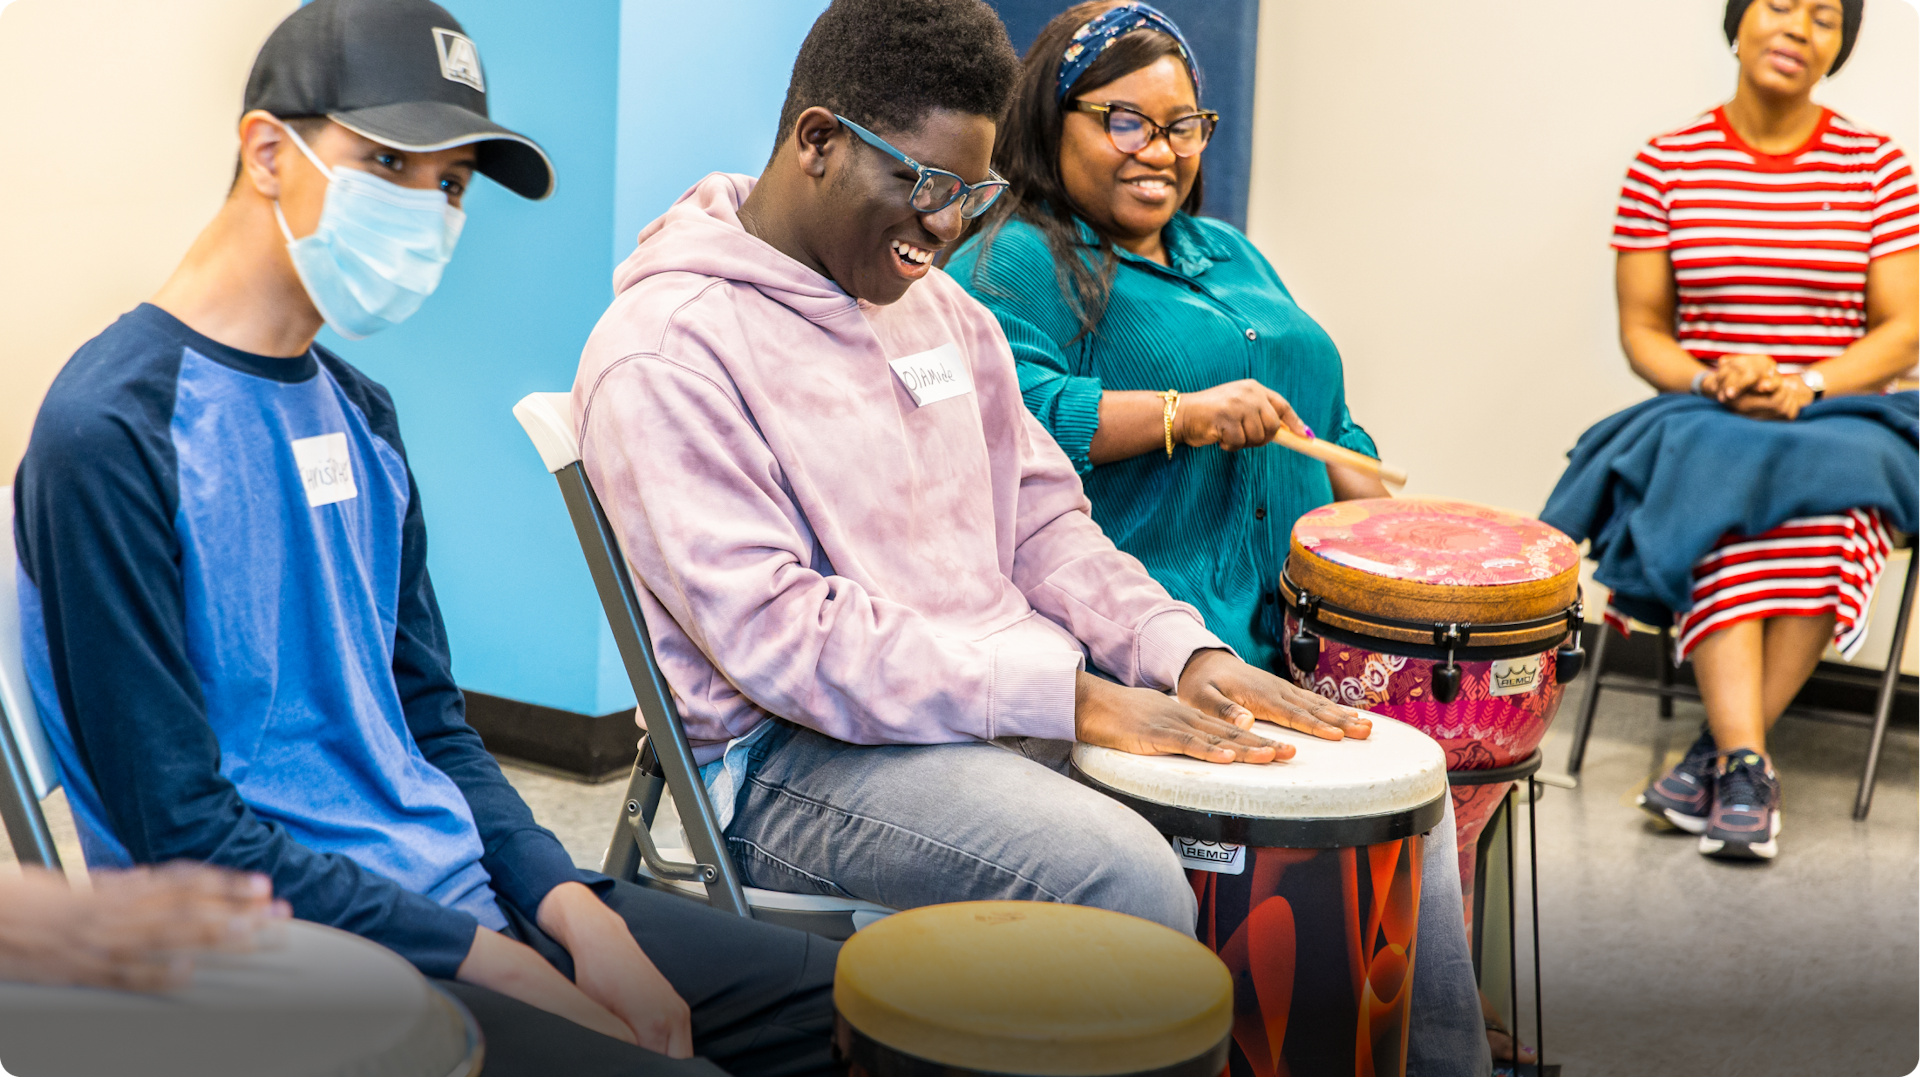 3 DMF participants laugh together and play drums with their hands, while another person supports them in the background